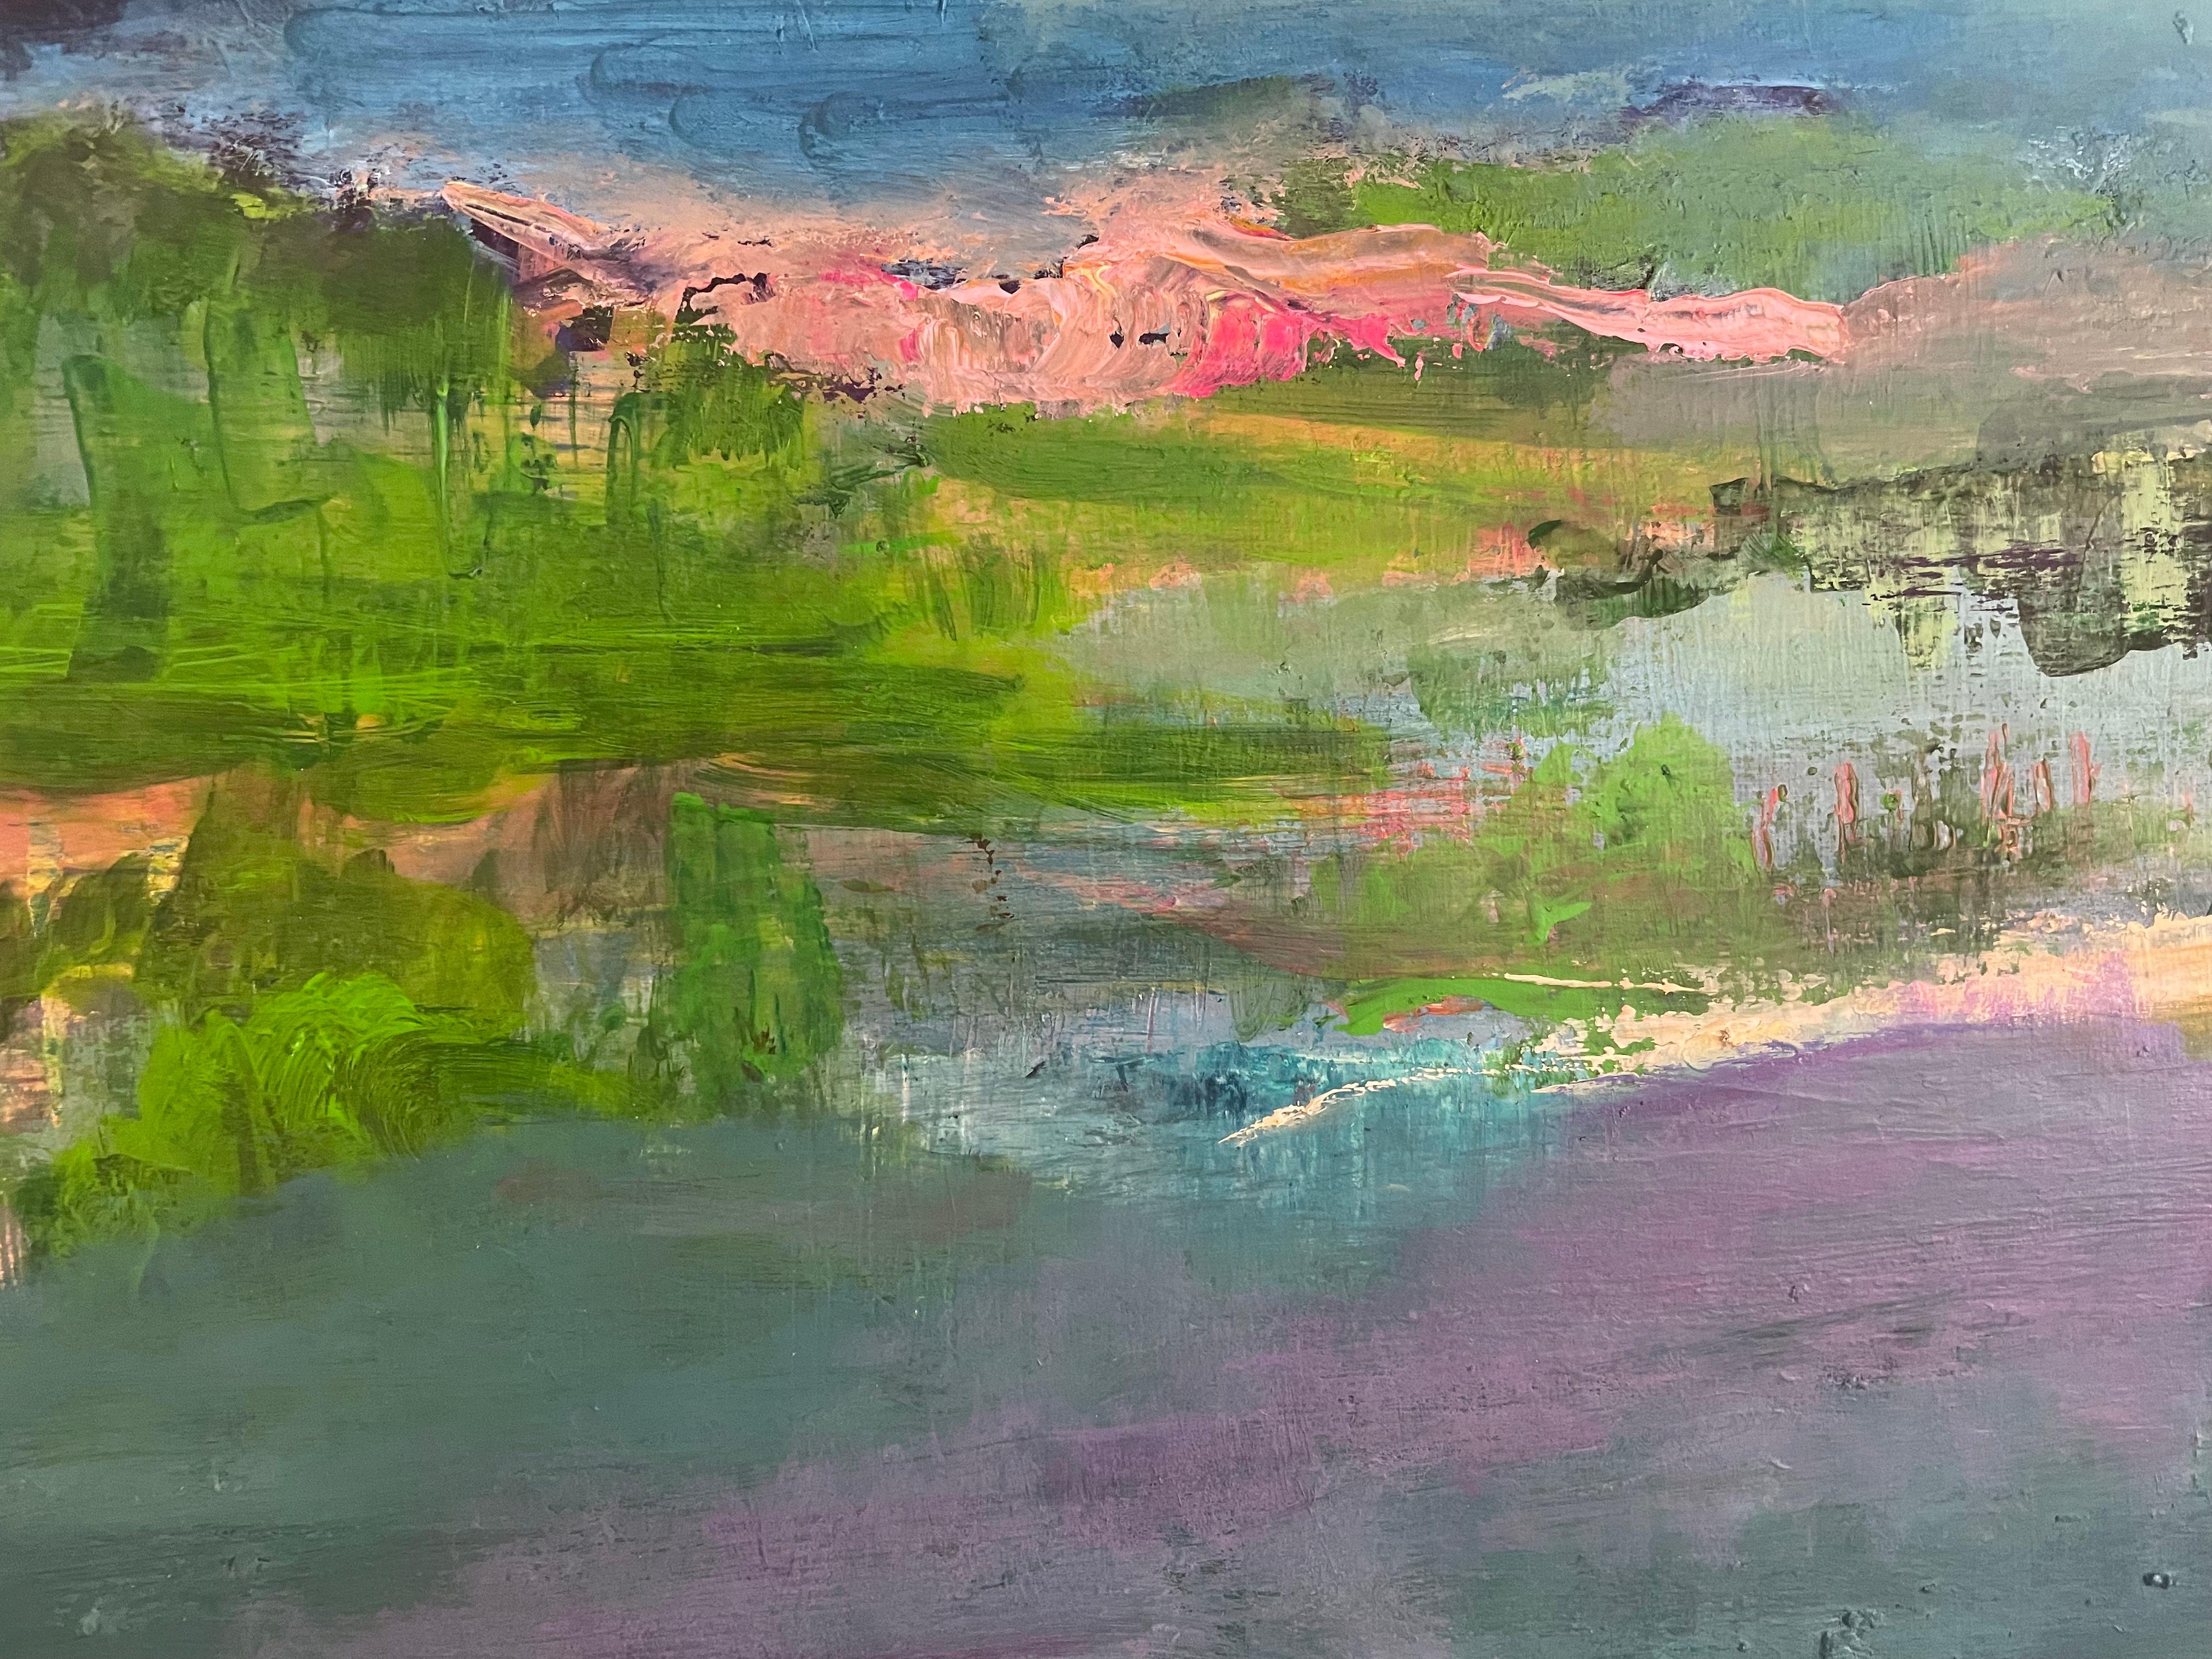 “Dreamscape” is an enchanting abstract landscape created by contemporary artist Susanne Kurdahl Vesterheden. This painting presents a joyful palette where fresh oranges, delicate pinks, and lively greens harmoniously merge with subtle and matte